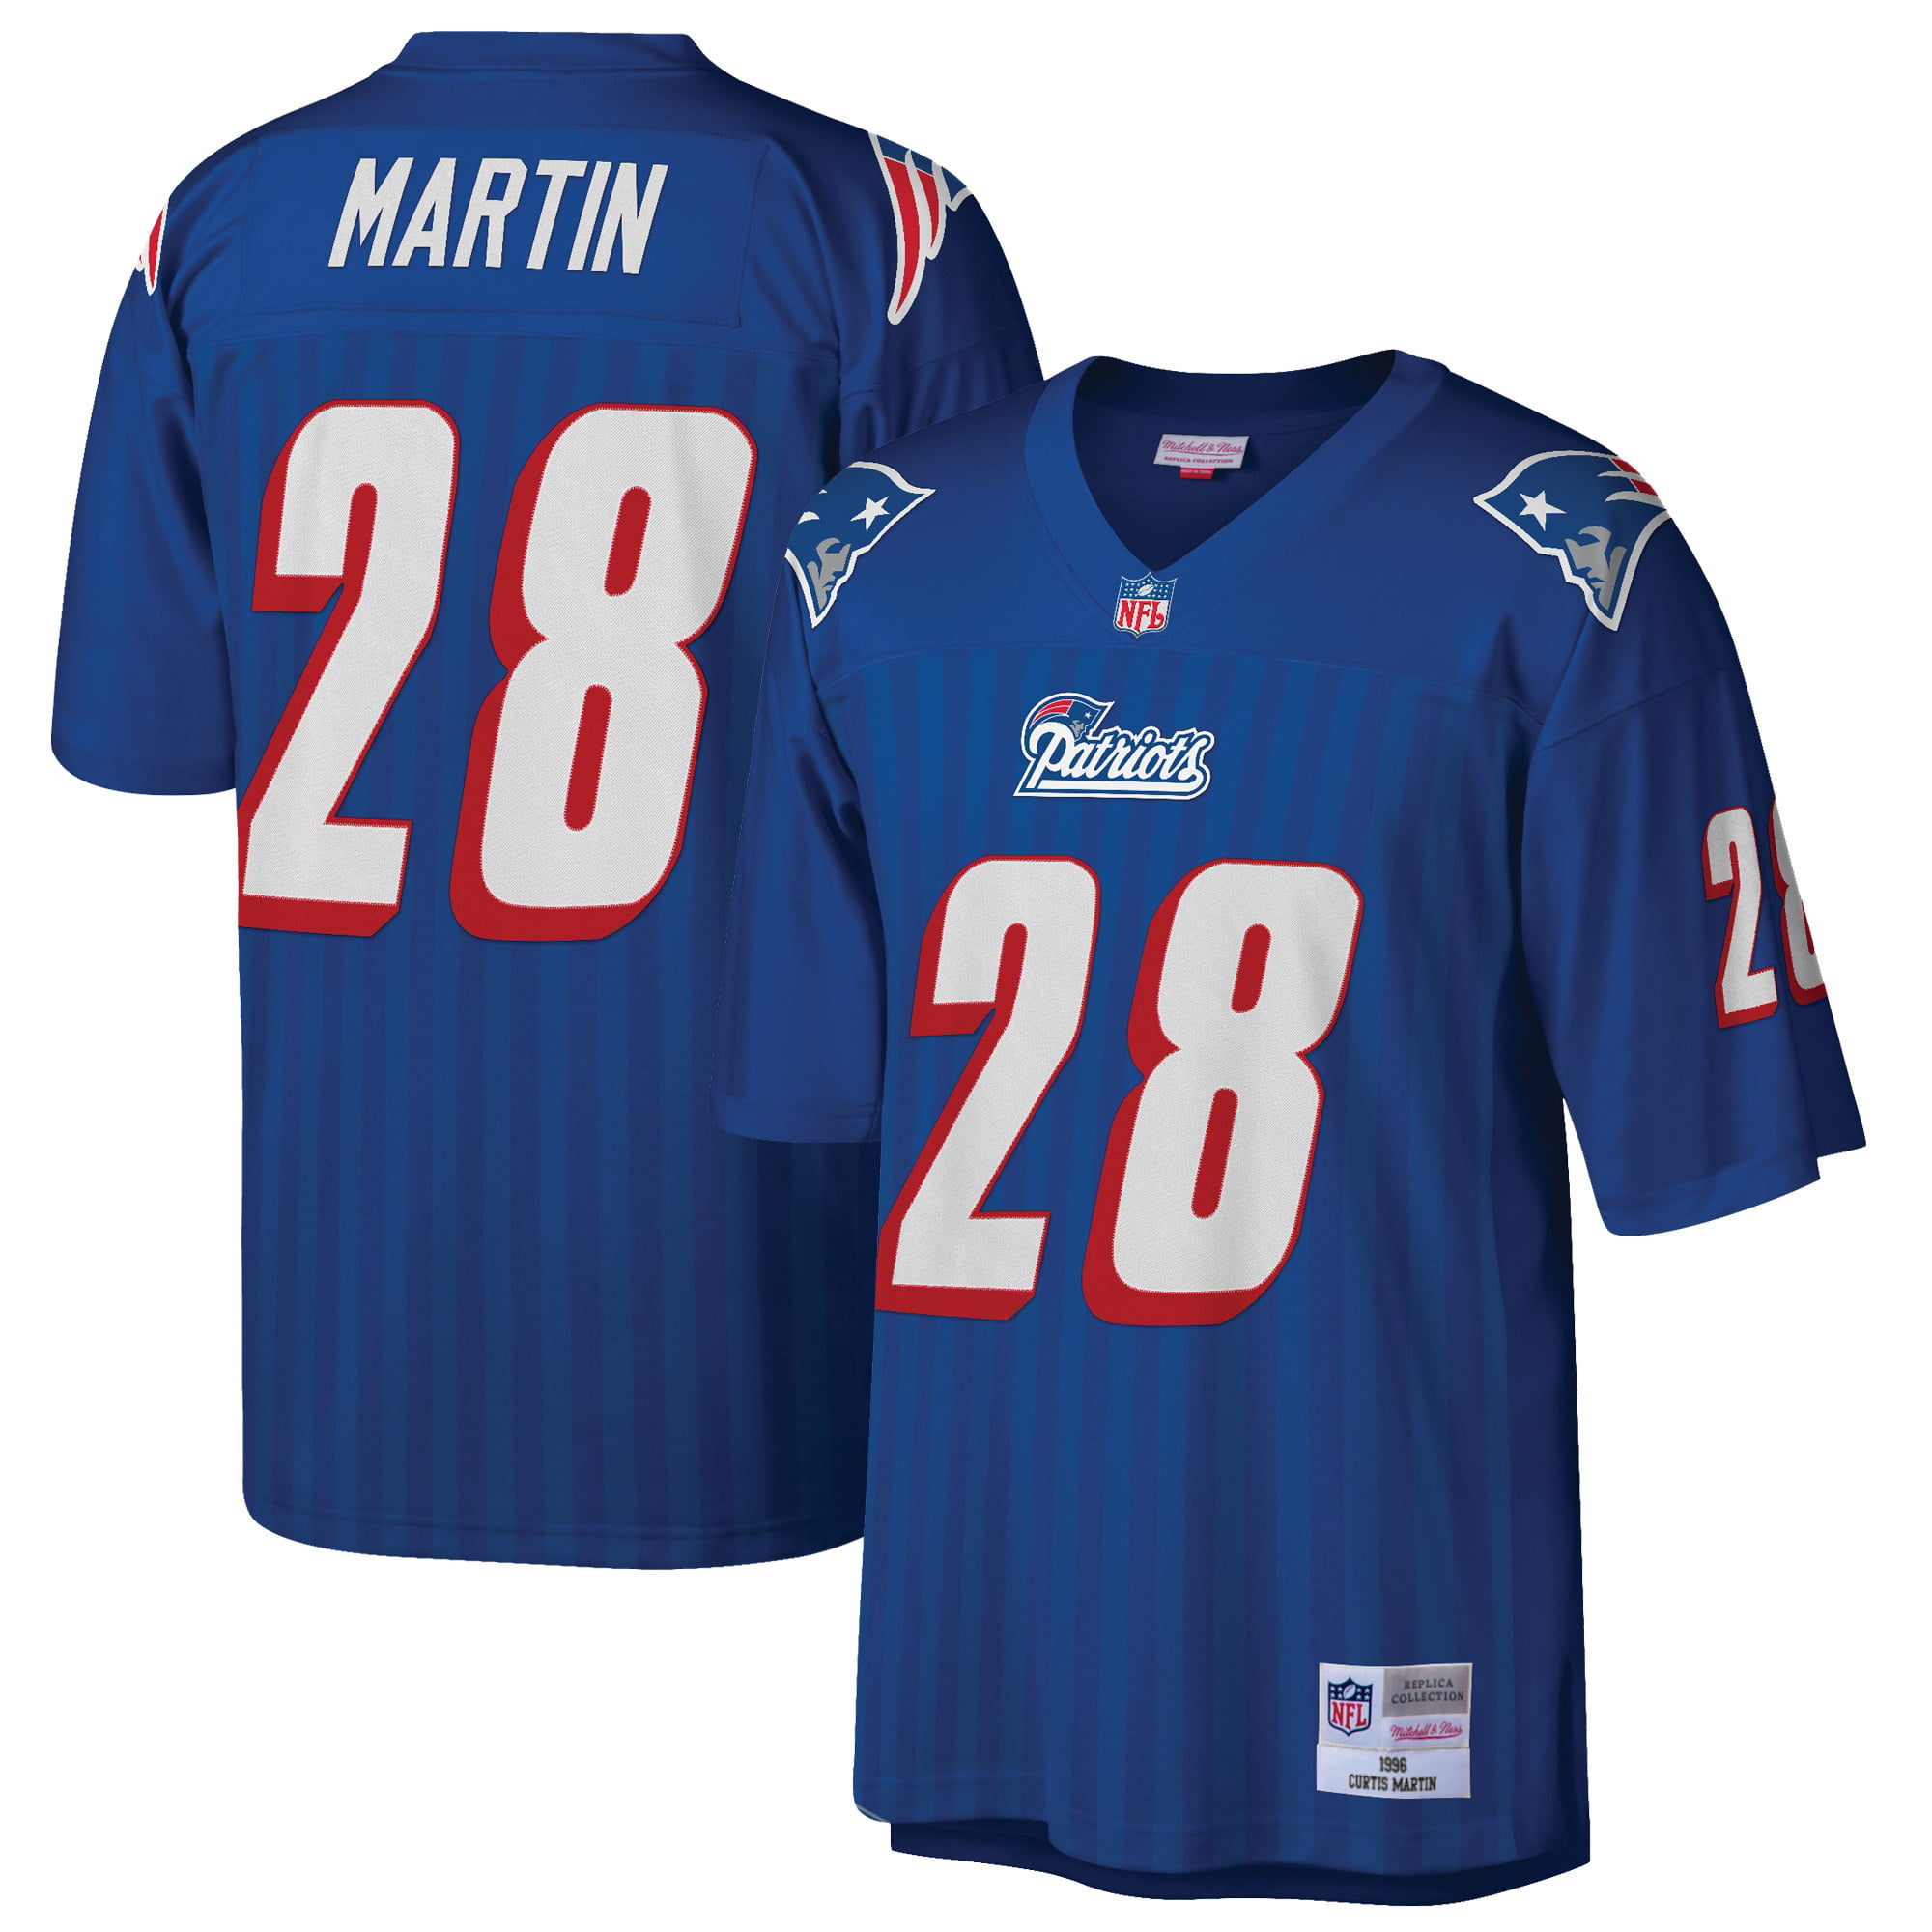 Retired Player Legacy Replica Jersey 